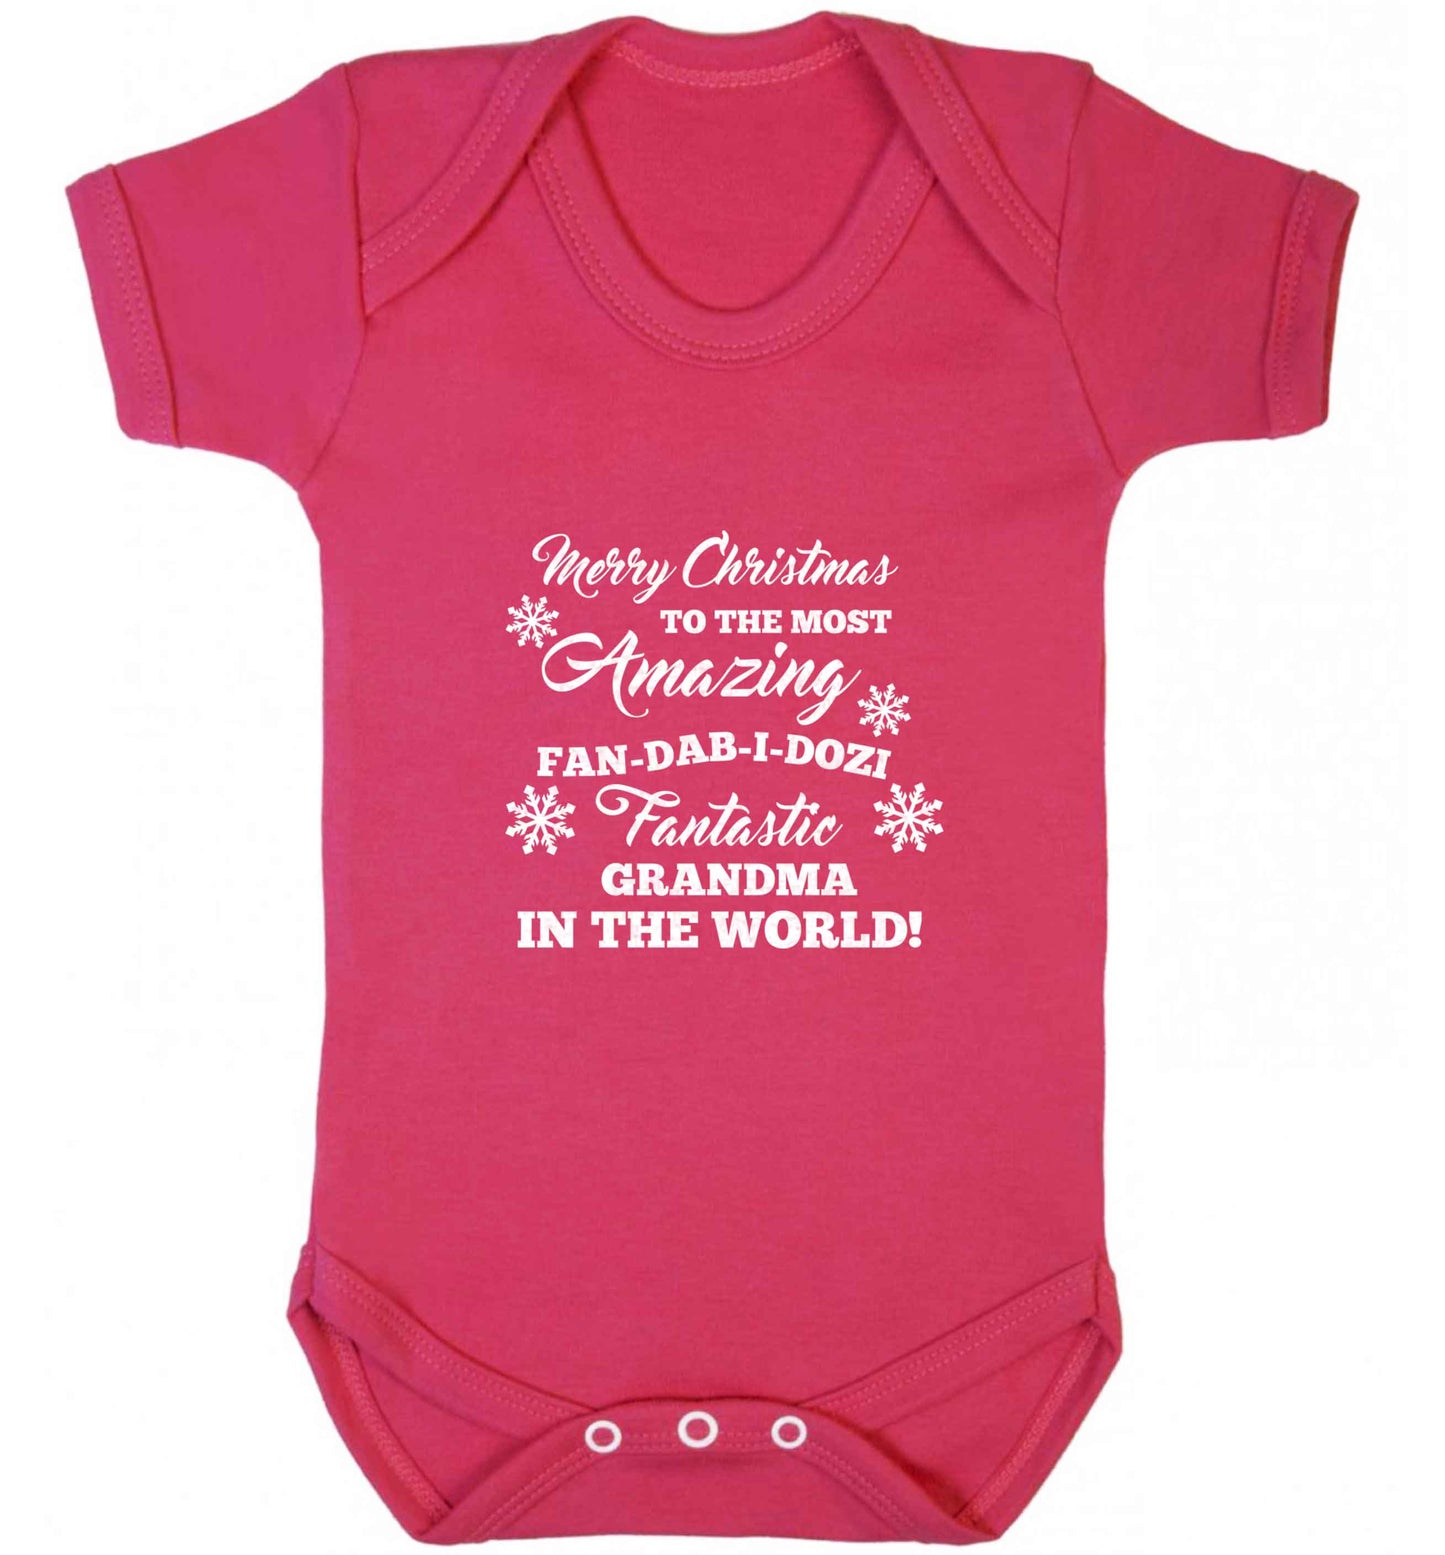 Merry Christmas to the most amazing fan-dab-i-dozi fantasic Grandma in the world baby vest dark pink 18-24 months